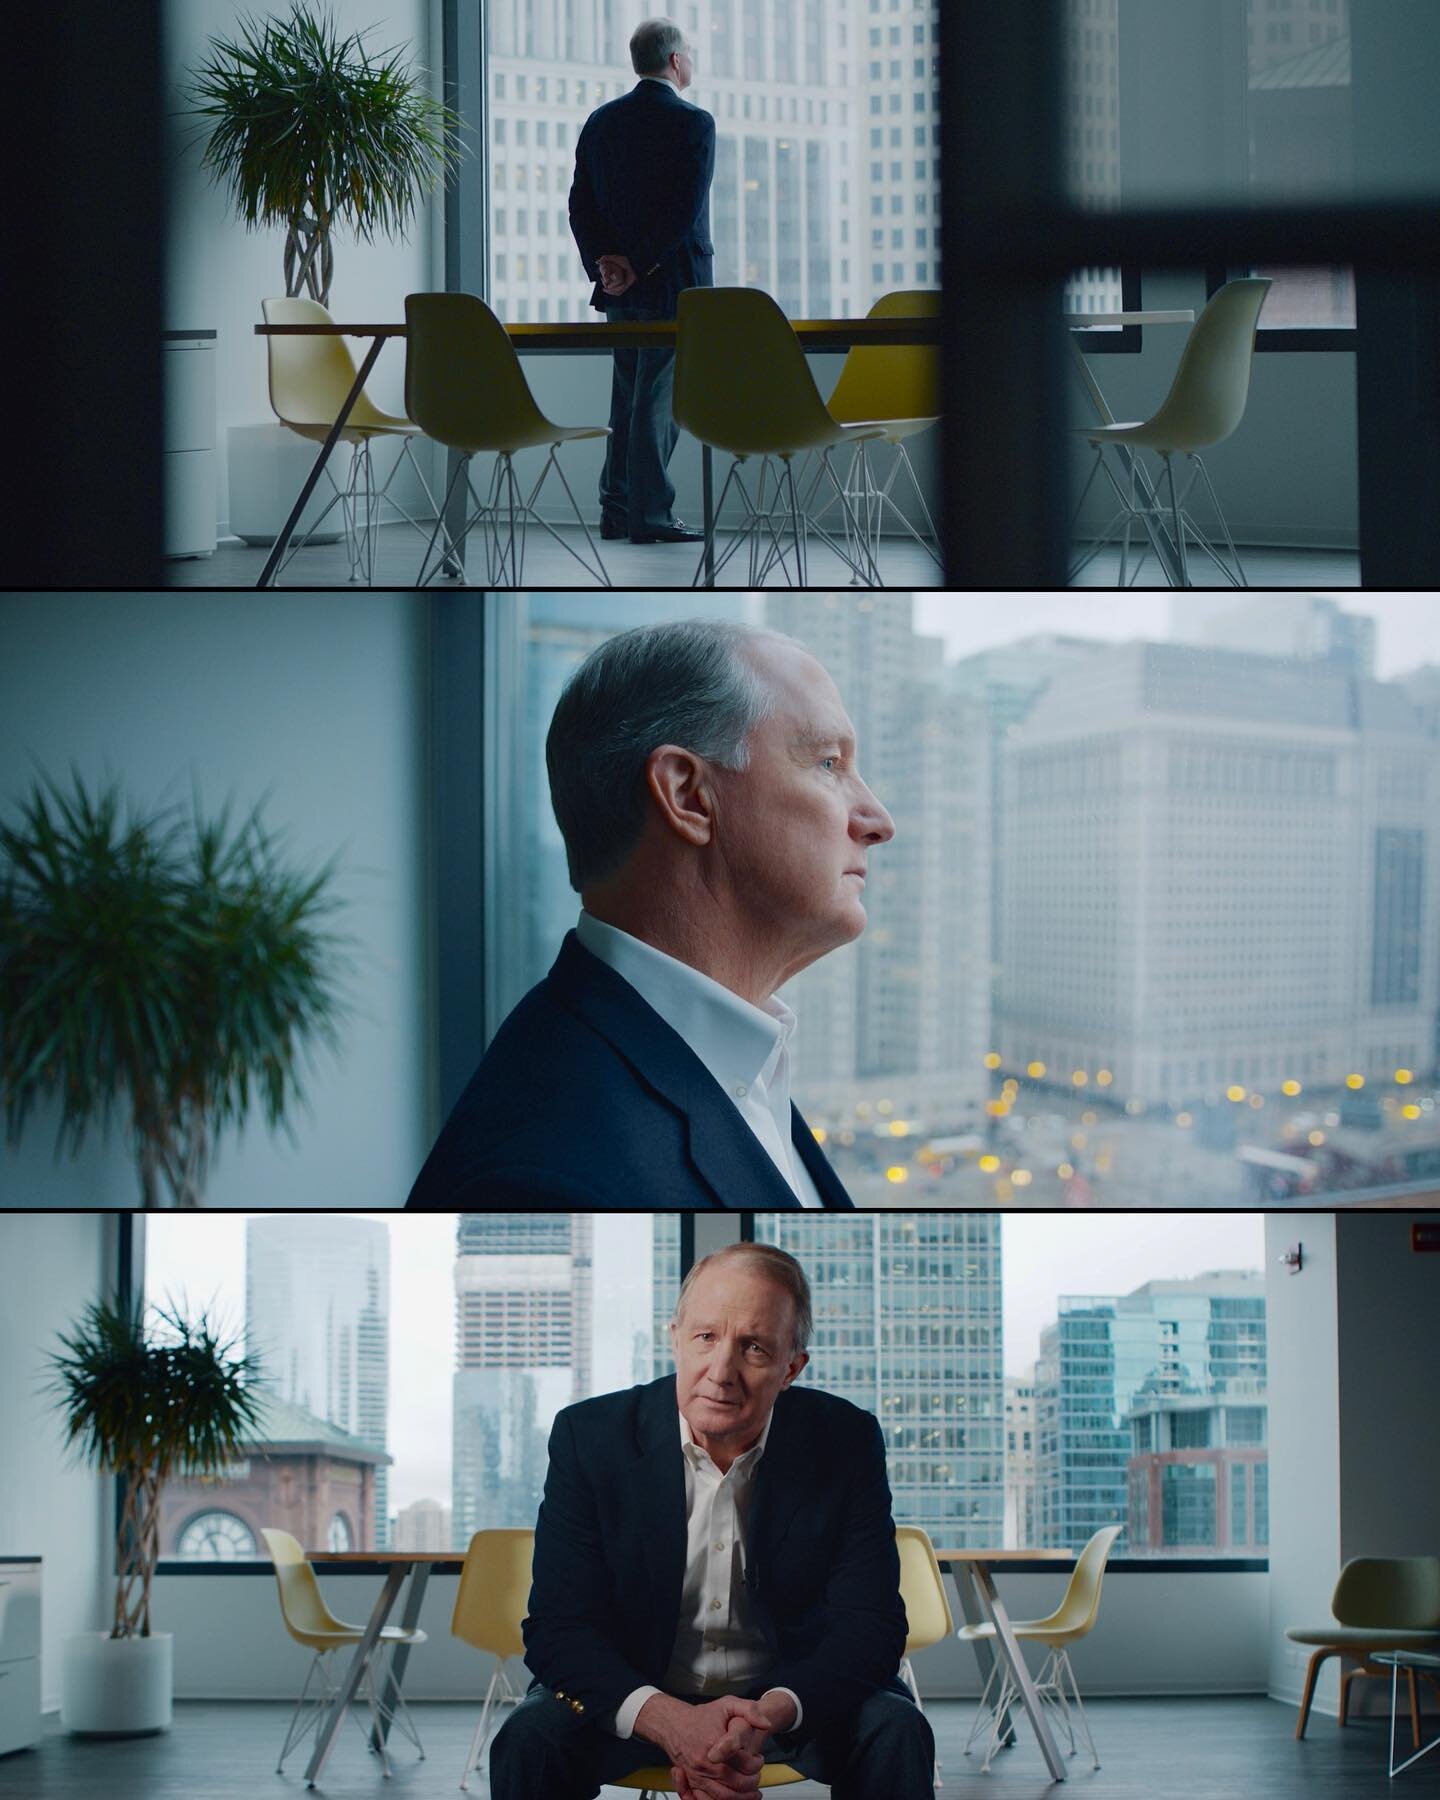 A few frames from a current project for @hummermowerassociates 

#chicago #corporatefilm #brandfilm #documentary #redscarletw